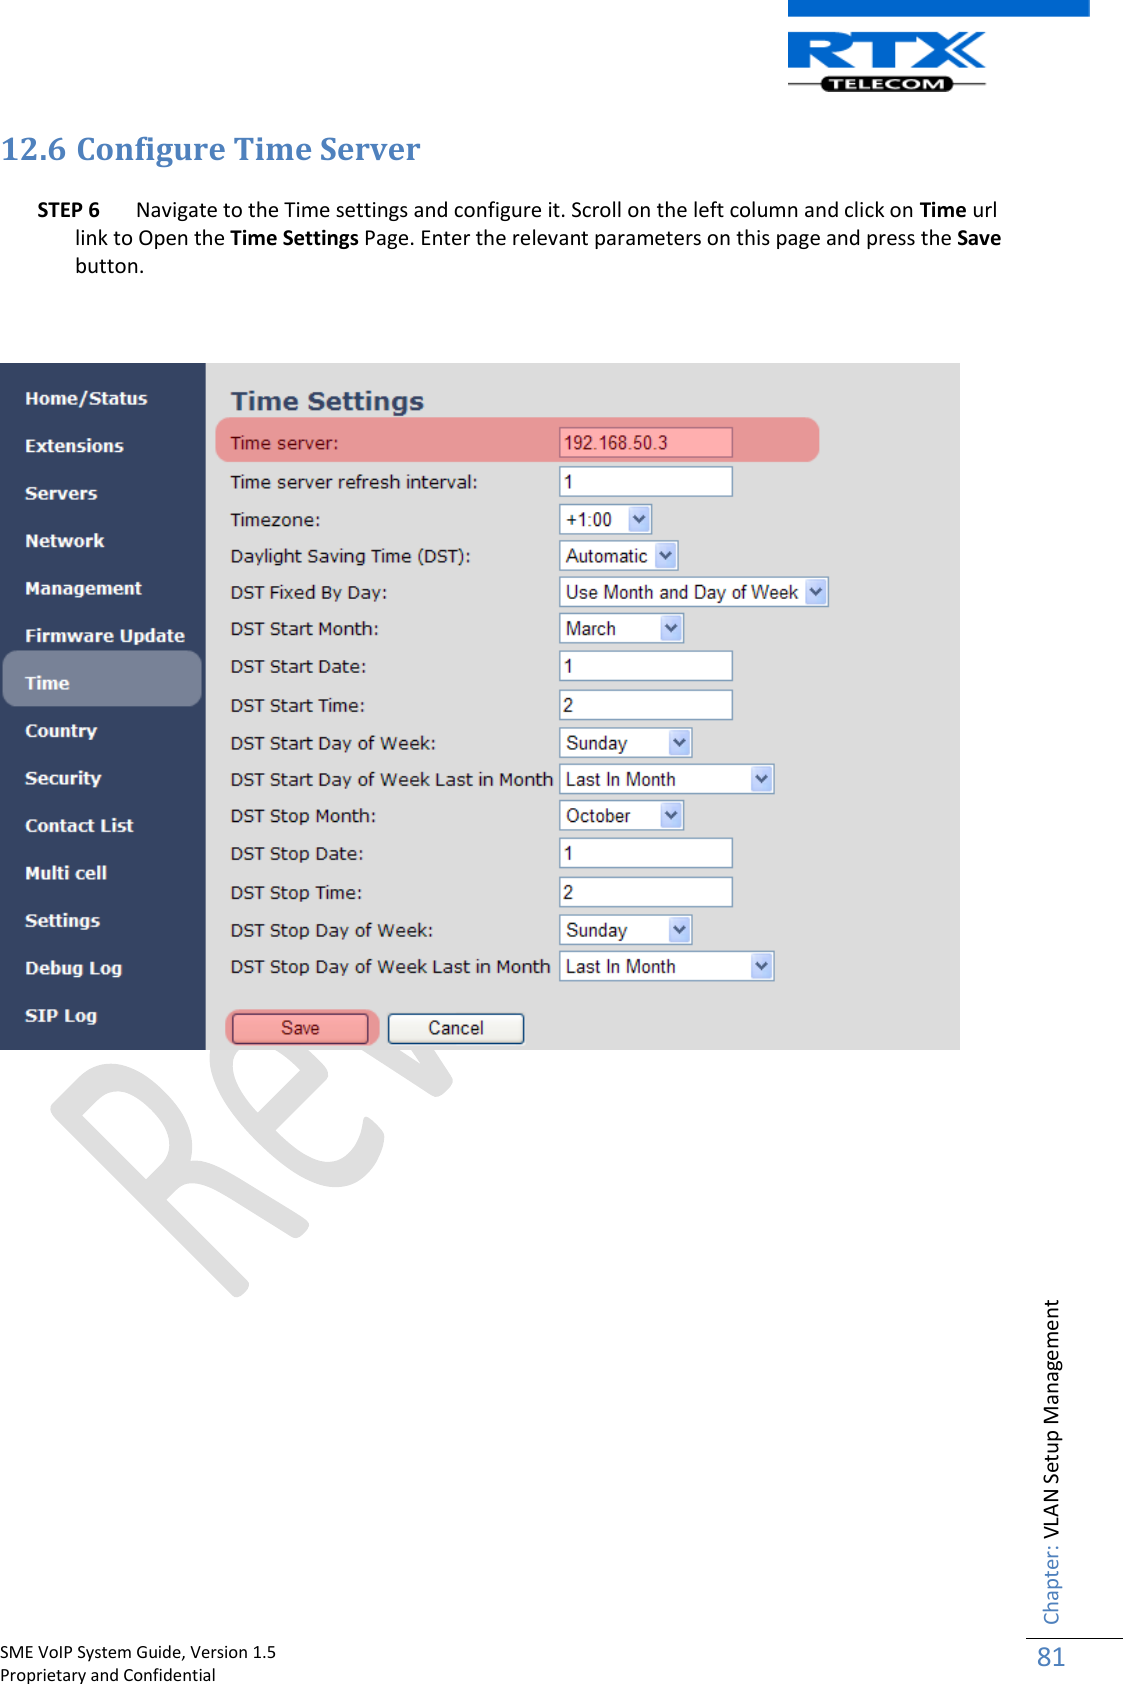    SME VoIP System Guide, Version 1.5                                                                                                                                                          Proprietary and Confidential    Chapter: VLAN Setup Management 81  12.6 Configure Time Server  STEP 6 Navigate to the Time settings and configure it. Scroll on the left column and click on Time url link to Open the Time Settings Page. Enter the relevant parameters on this page and press the Save button.                      